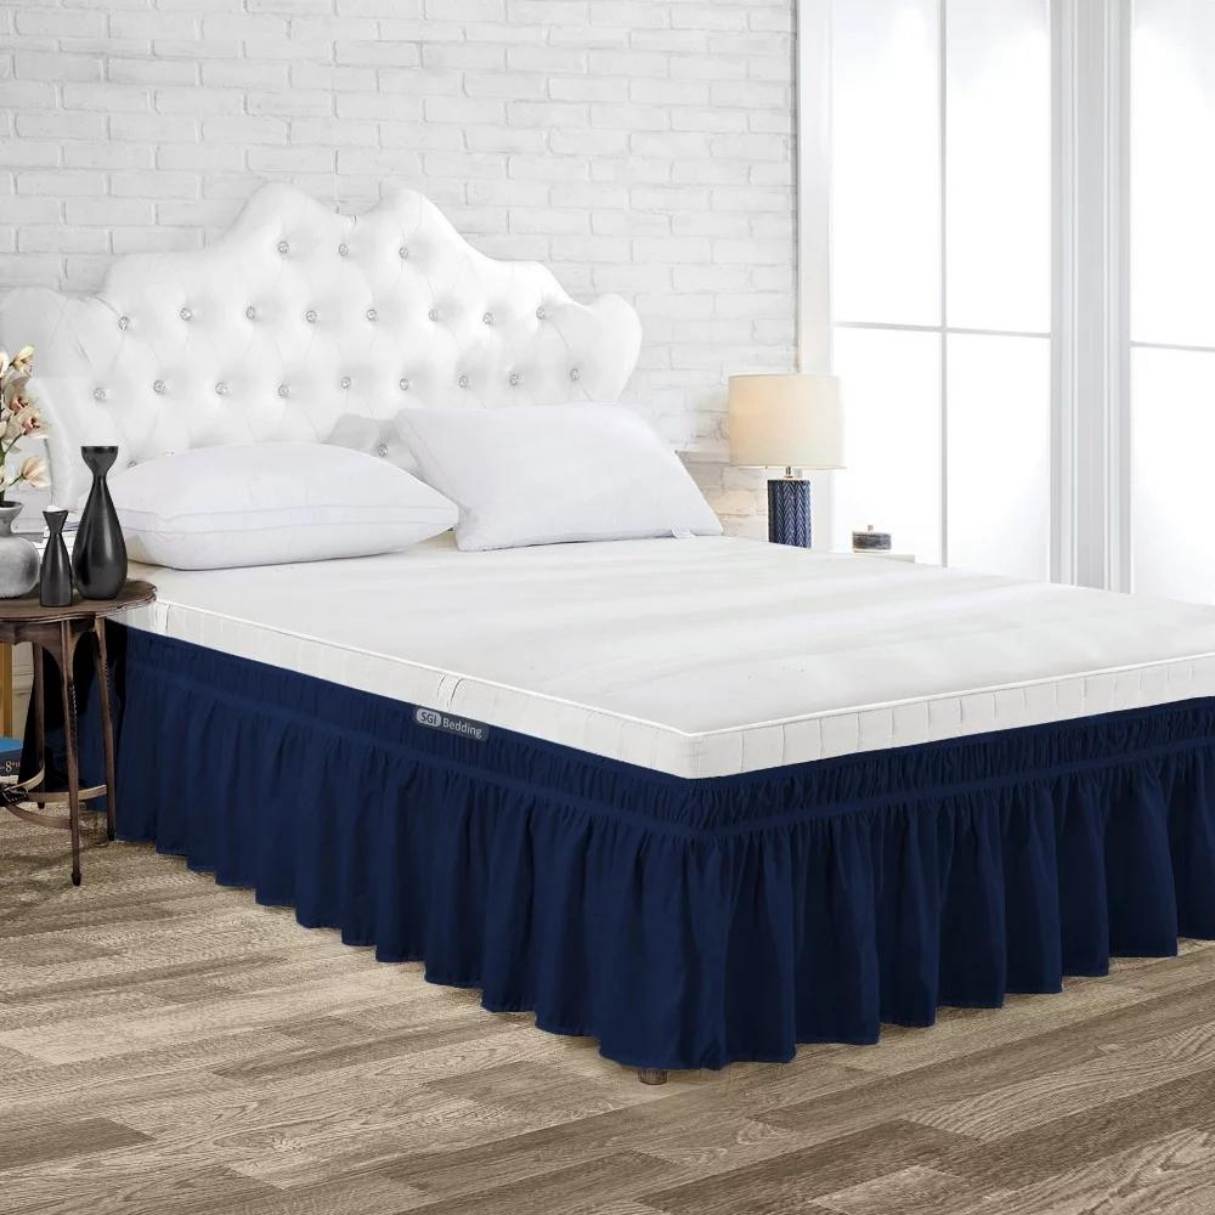 Easy Fit Wrap Around Solid Ruffled Bed Skirt, Queen/King, Spa